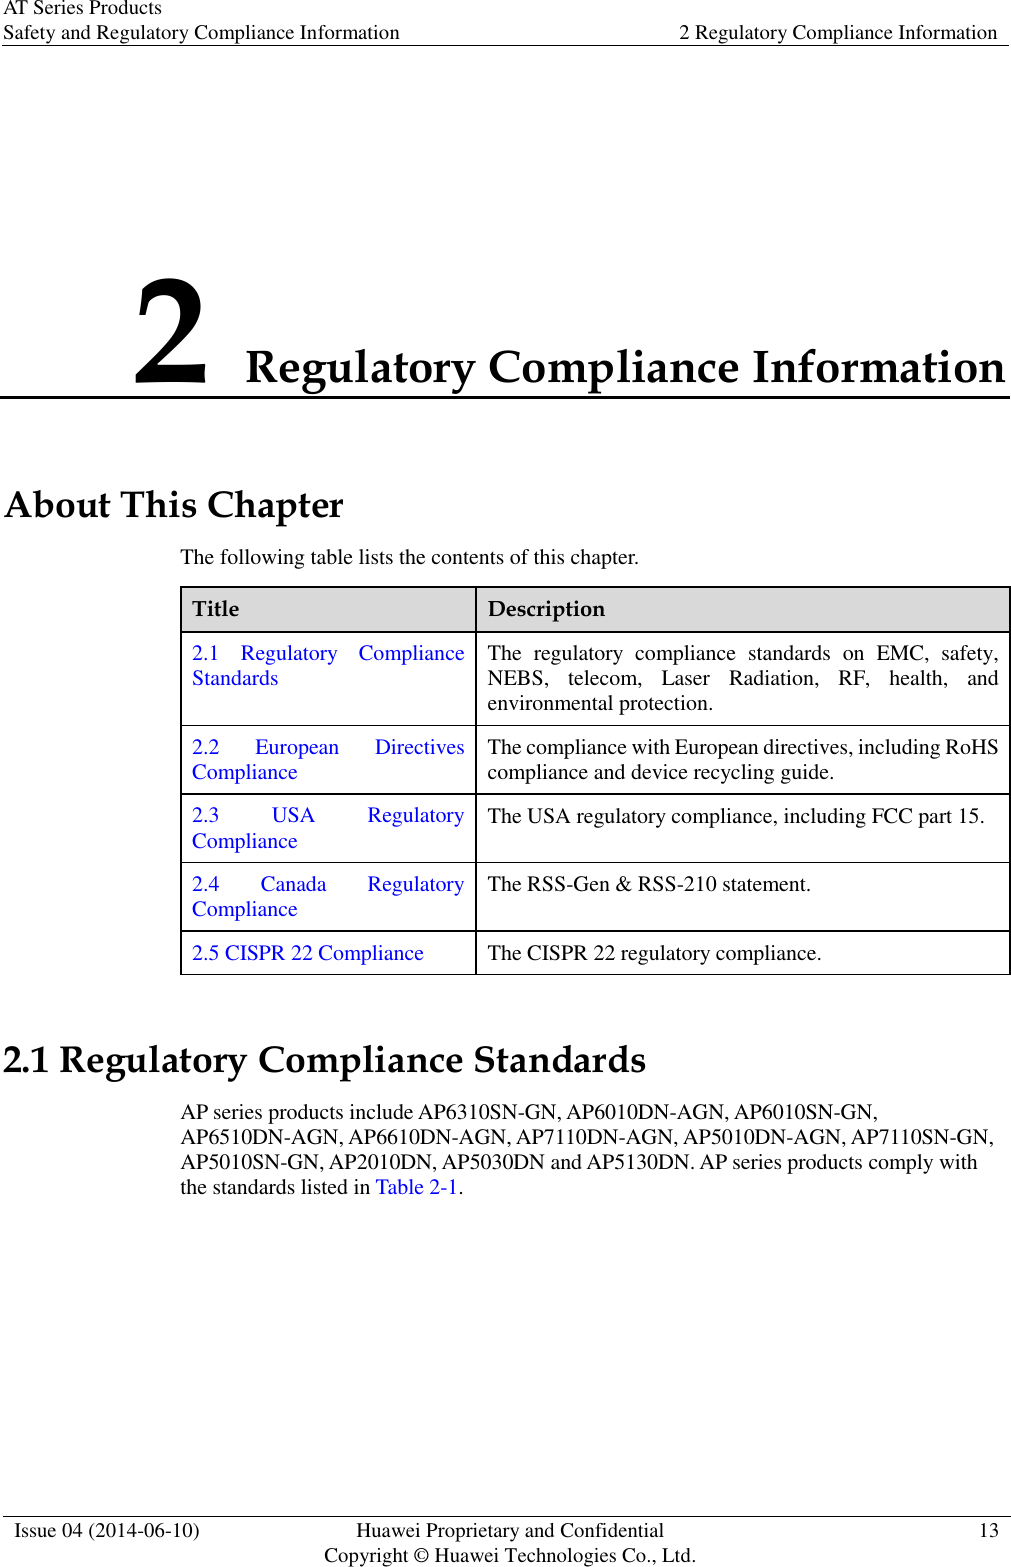 AT Series Products Safety and Regulatory Compliance Information 2 Regulatory Compliance Information  Issue 04 (2014-06-10) Huawei Proprietary and Confidential           Copyright © Huawei Technologies Co., Ltd. 13  2 Regulatory Compliance Information About This Chapter The following table lists the contents of this chapter. Title Description 2.1  Regulatory  Compliance Standards The  regulatory  compliance  standards  on  EMC,  safety, NEBS,  telecom,  Laser  Radiation,  RF,  health,  and environmental protection. 2.2  European  Directives Compliance The compliance with European directives, including RoHS compliance and device recycling guide. 2.3  USA  Regulatory Compliance The USA regulatory compliance, including FCC part 15. 2.4  Canada  Regulatory Compliance The RSS-Gen &amp; RSS-210 statement. 2.5 CISPR 22 Compliance The CISPR 22 regulatory compliance. 2.1 Regulatory Compliance Standards AP series products include AP6310SN-GN, AP6010DN-AGN, AP6010SN-GN, AP6510DN-AGN, AP6610DN-AGN, AP7110DN-AGN, AP5010DN-AGN, AP7110SN-GN, AP5010SN-GN, AP2010DN, AP5030DN and AP5130DN. AP series products comply with the standards listed in Table 2-1. 